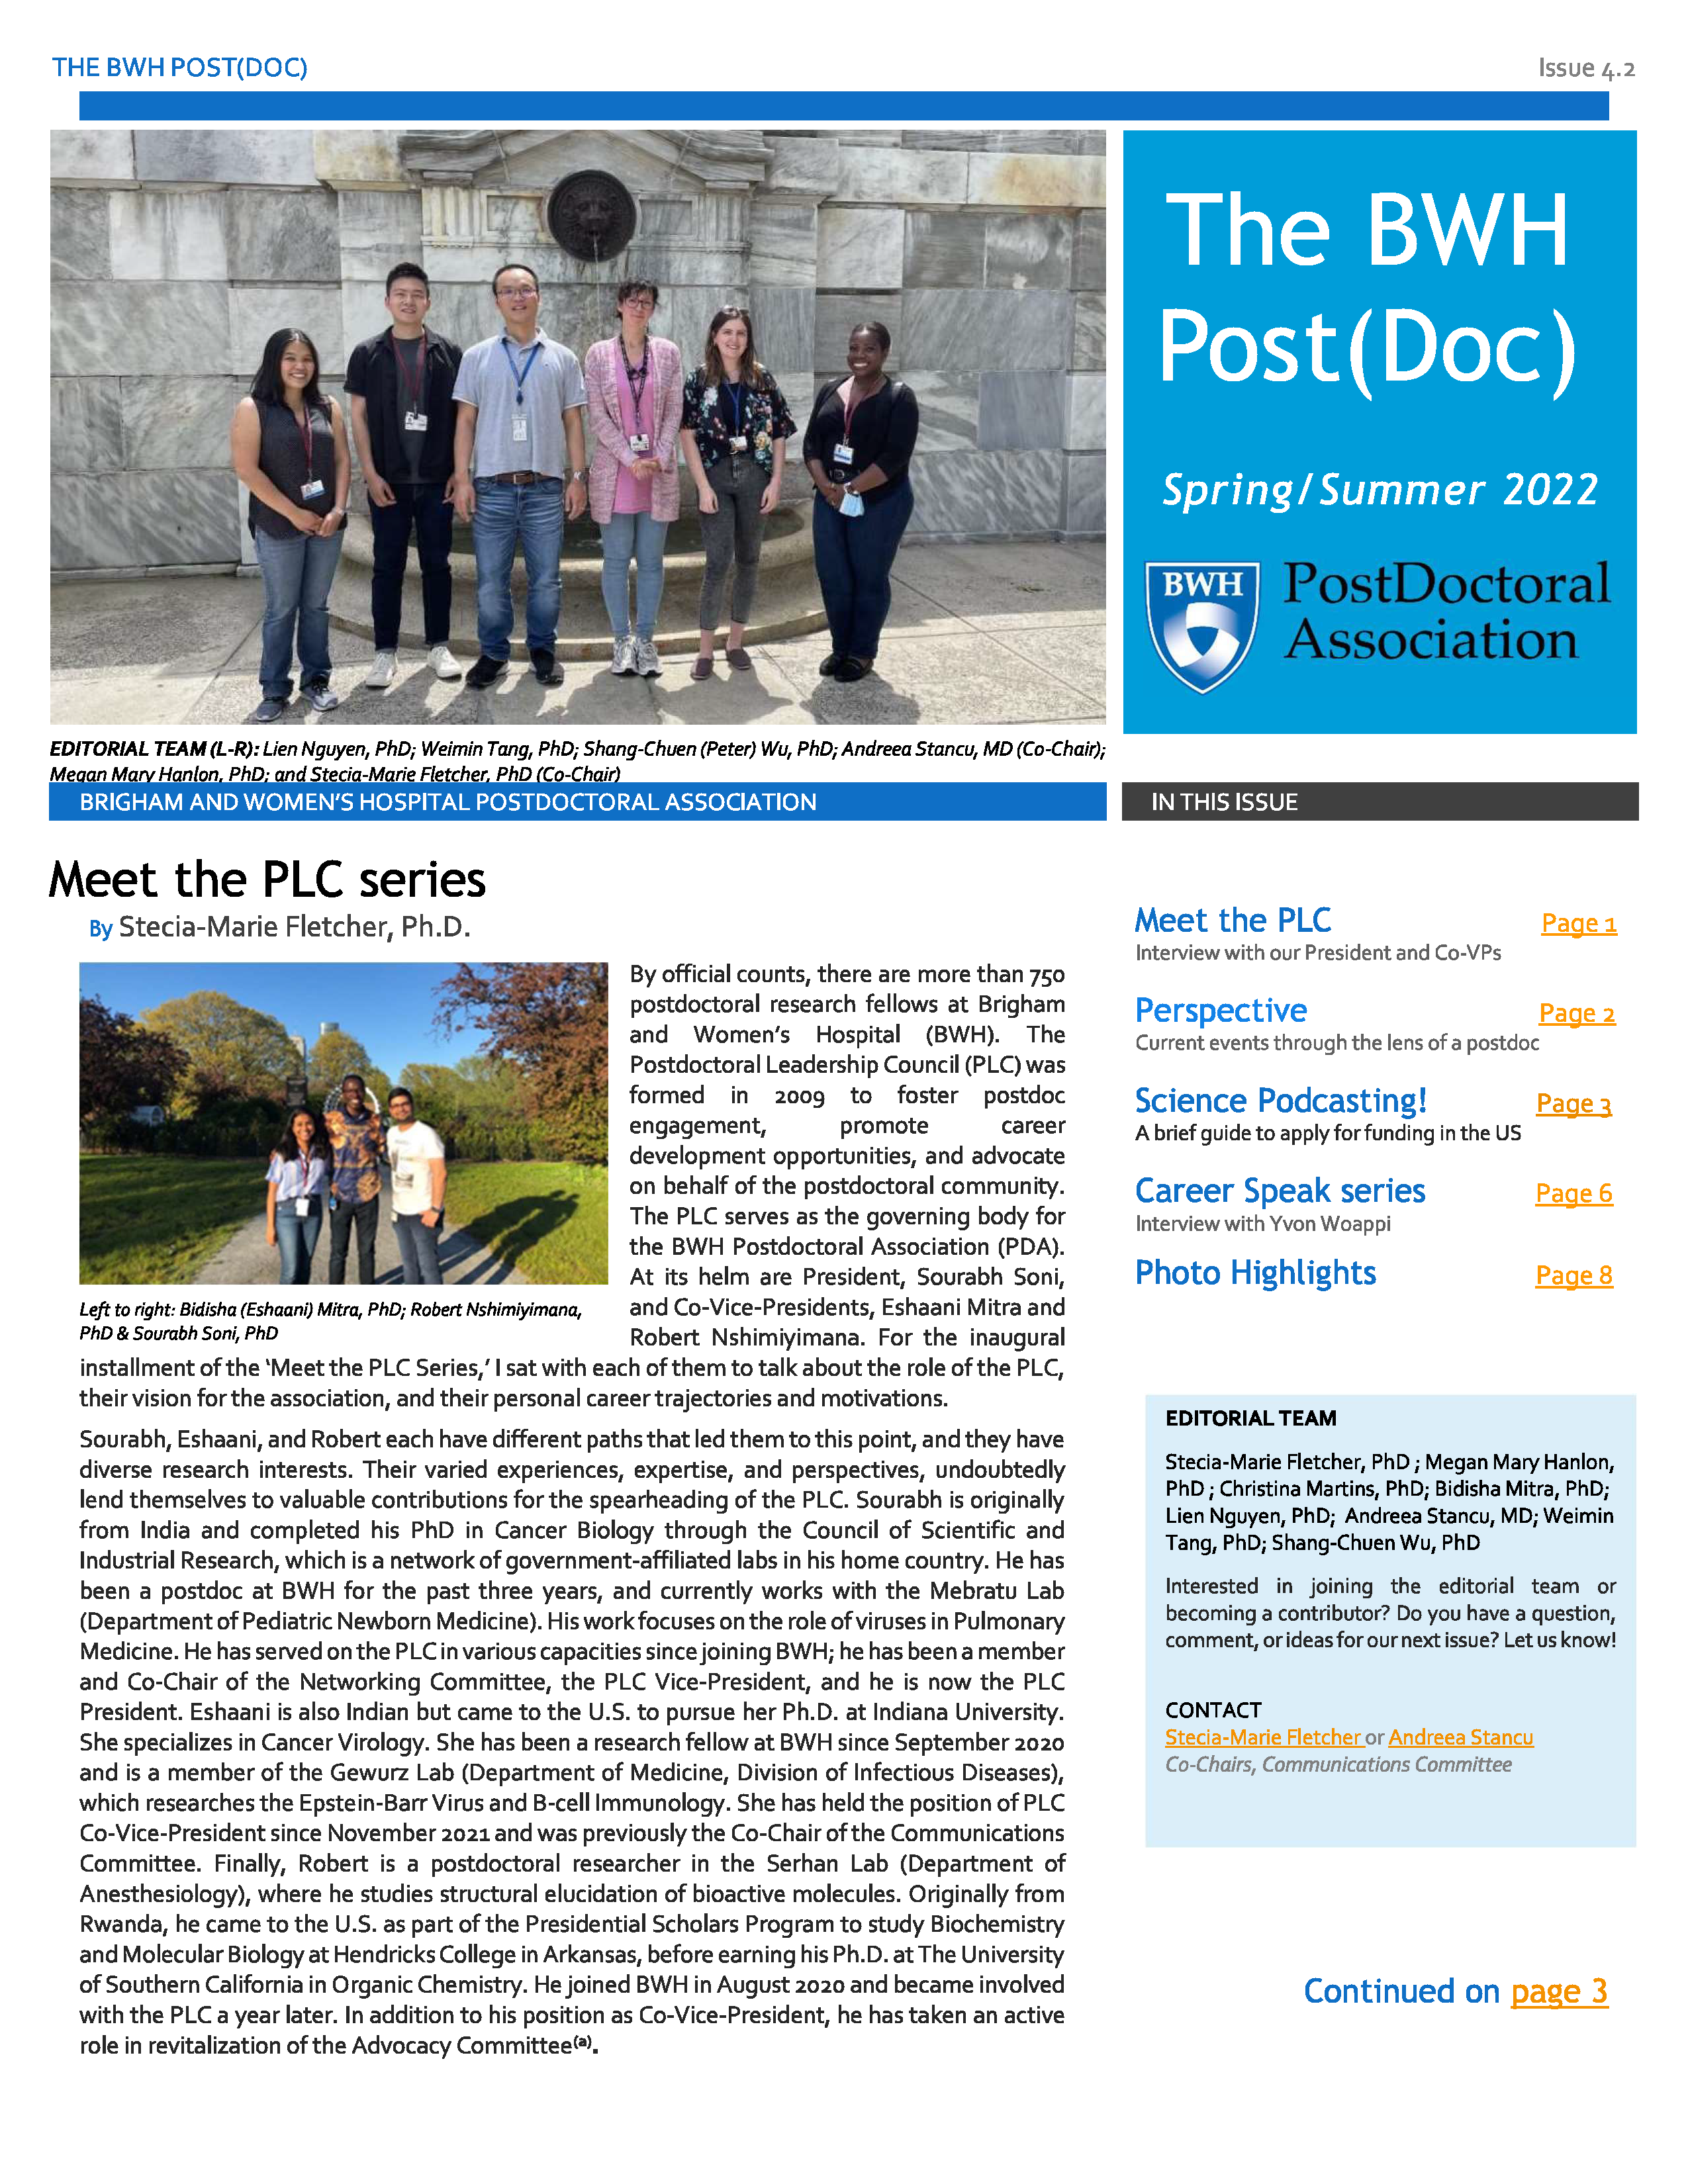 Front page of the 2022 Spring/Summer issue of The BWH Post(Doc)